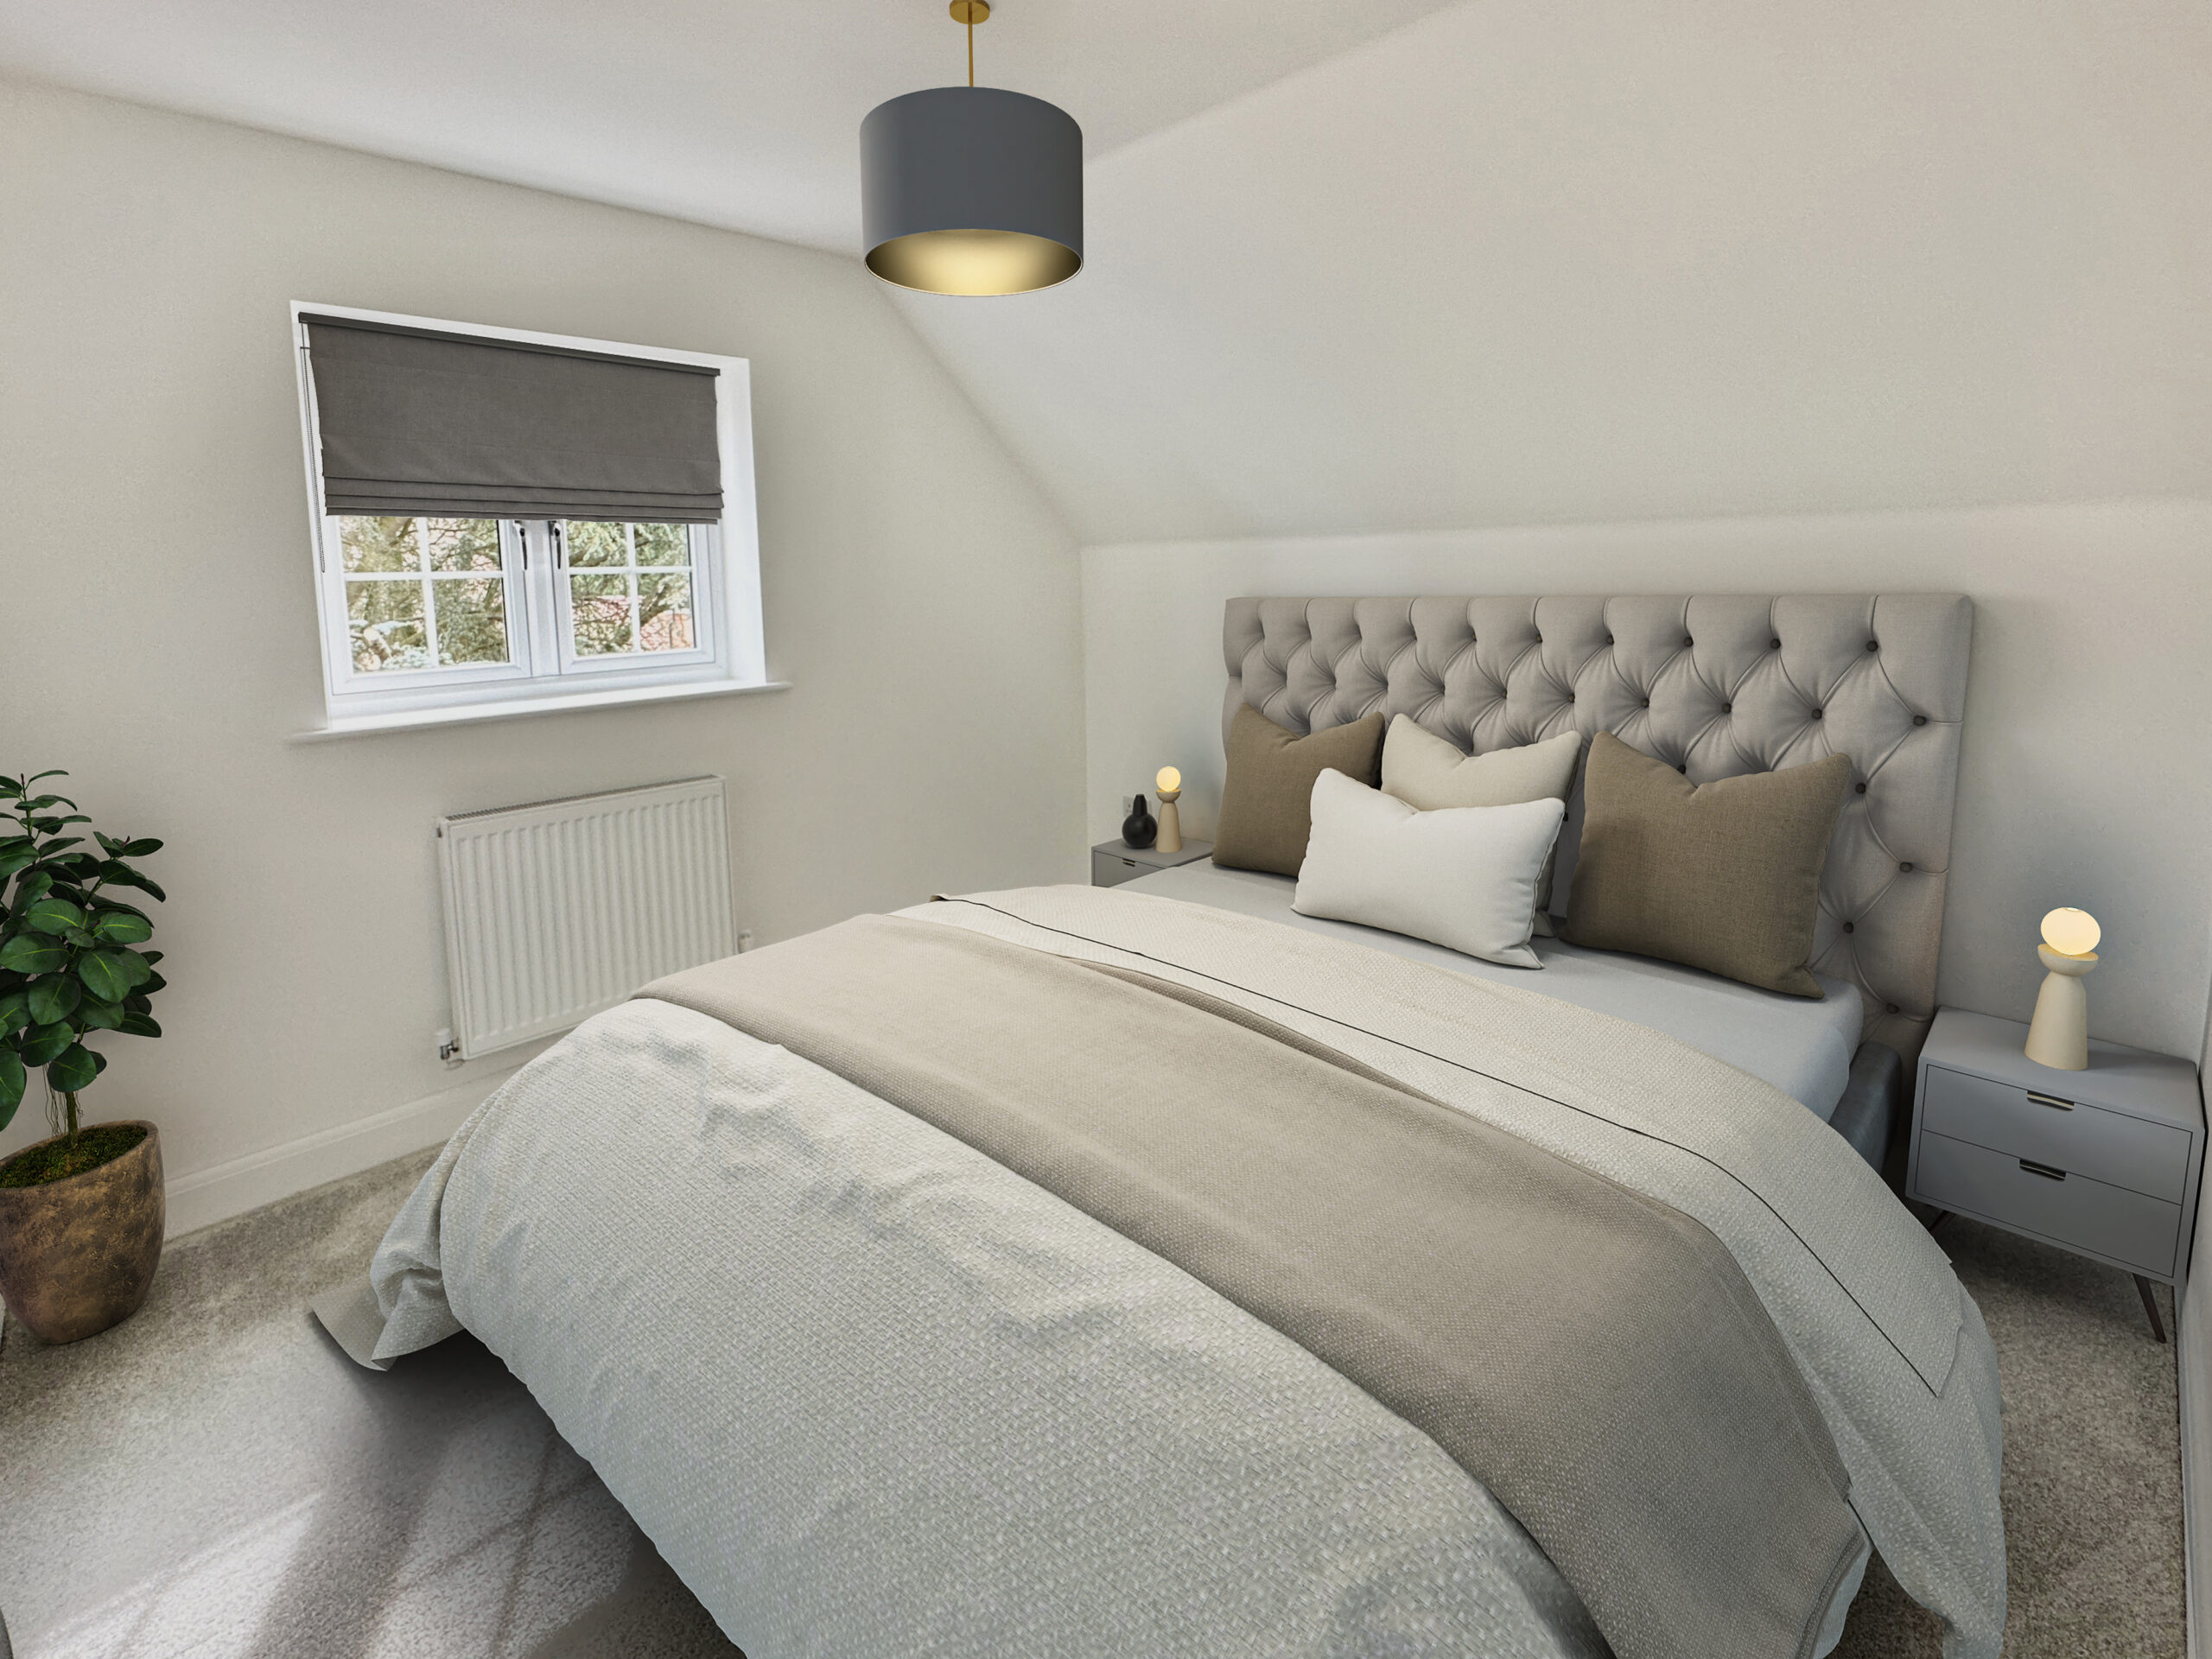 Image of a bedroom at Wilton Park - available to purchase through Shared Ownership on Share to Buy!